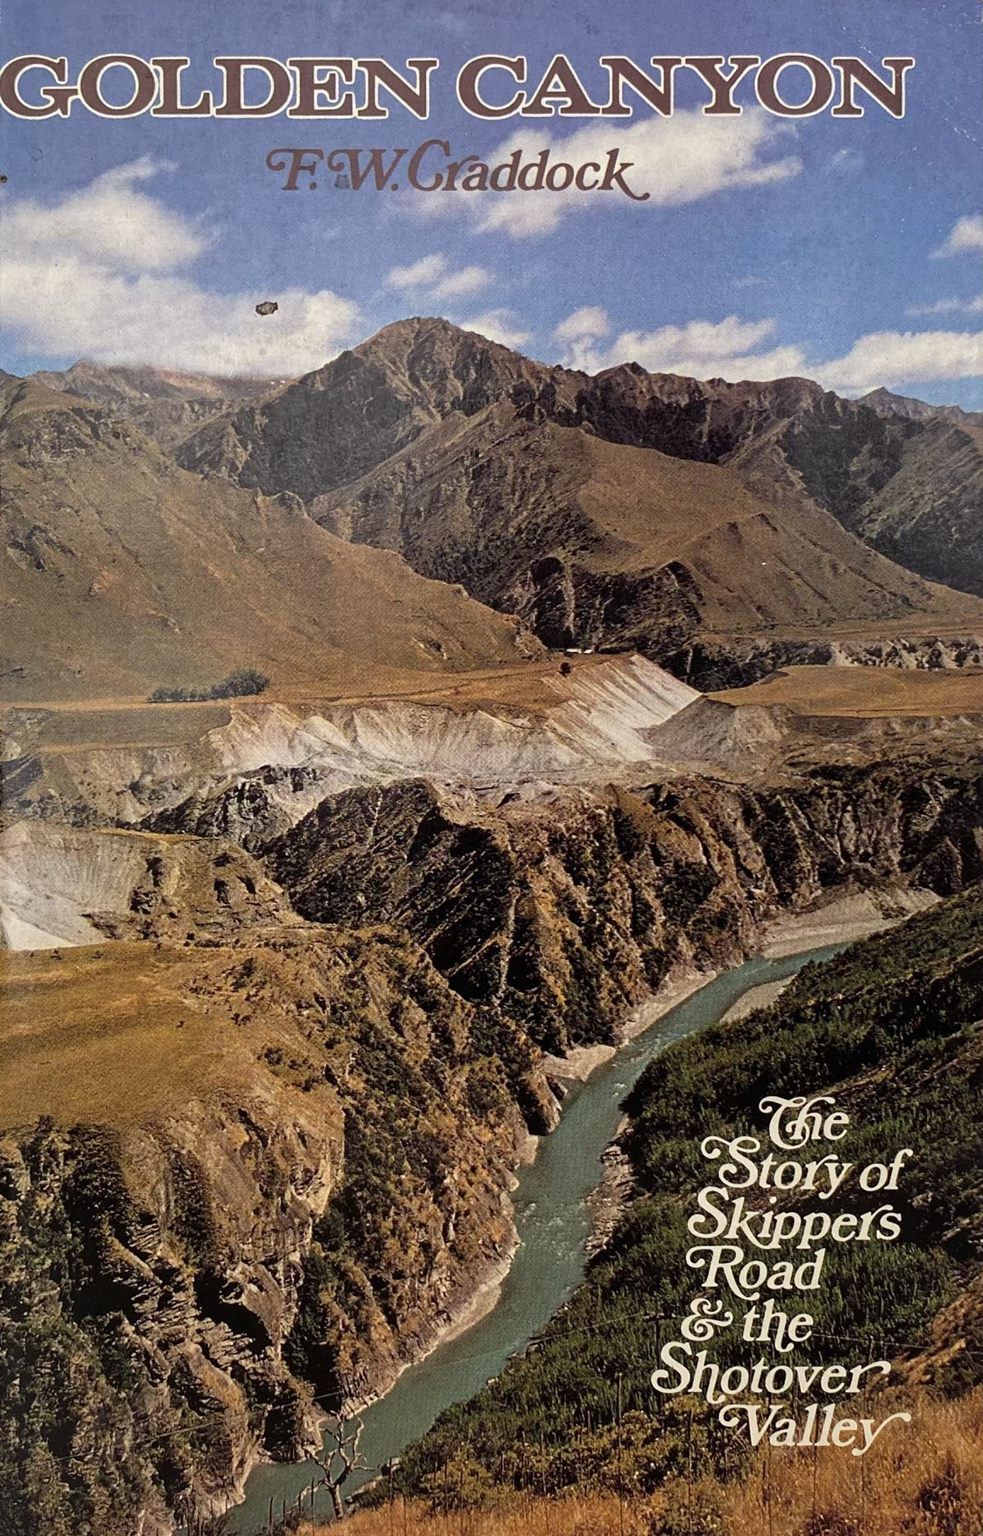 GOLDEN CANYON: The Story of Skippers Road and the Shotover Valley